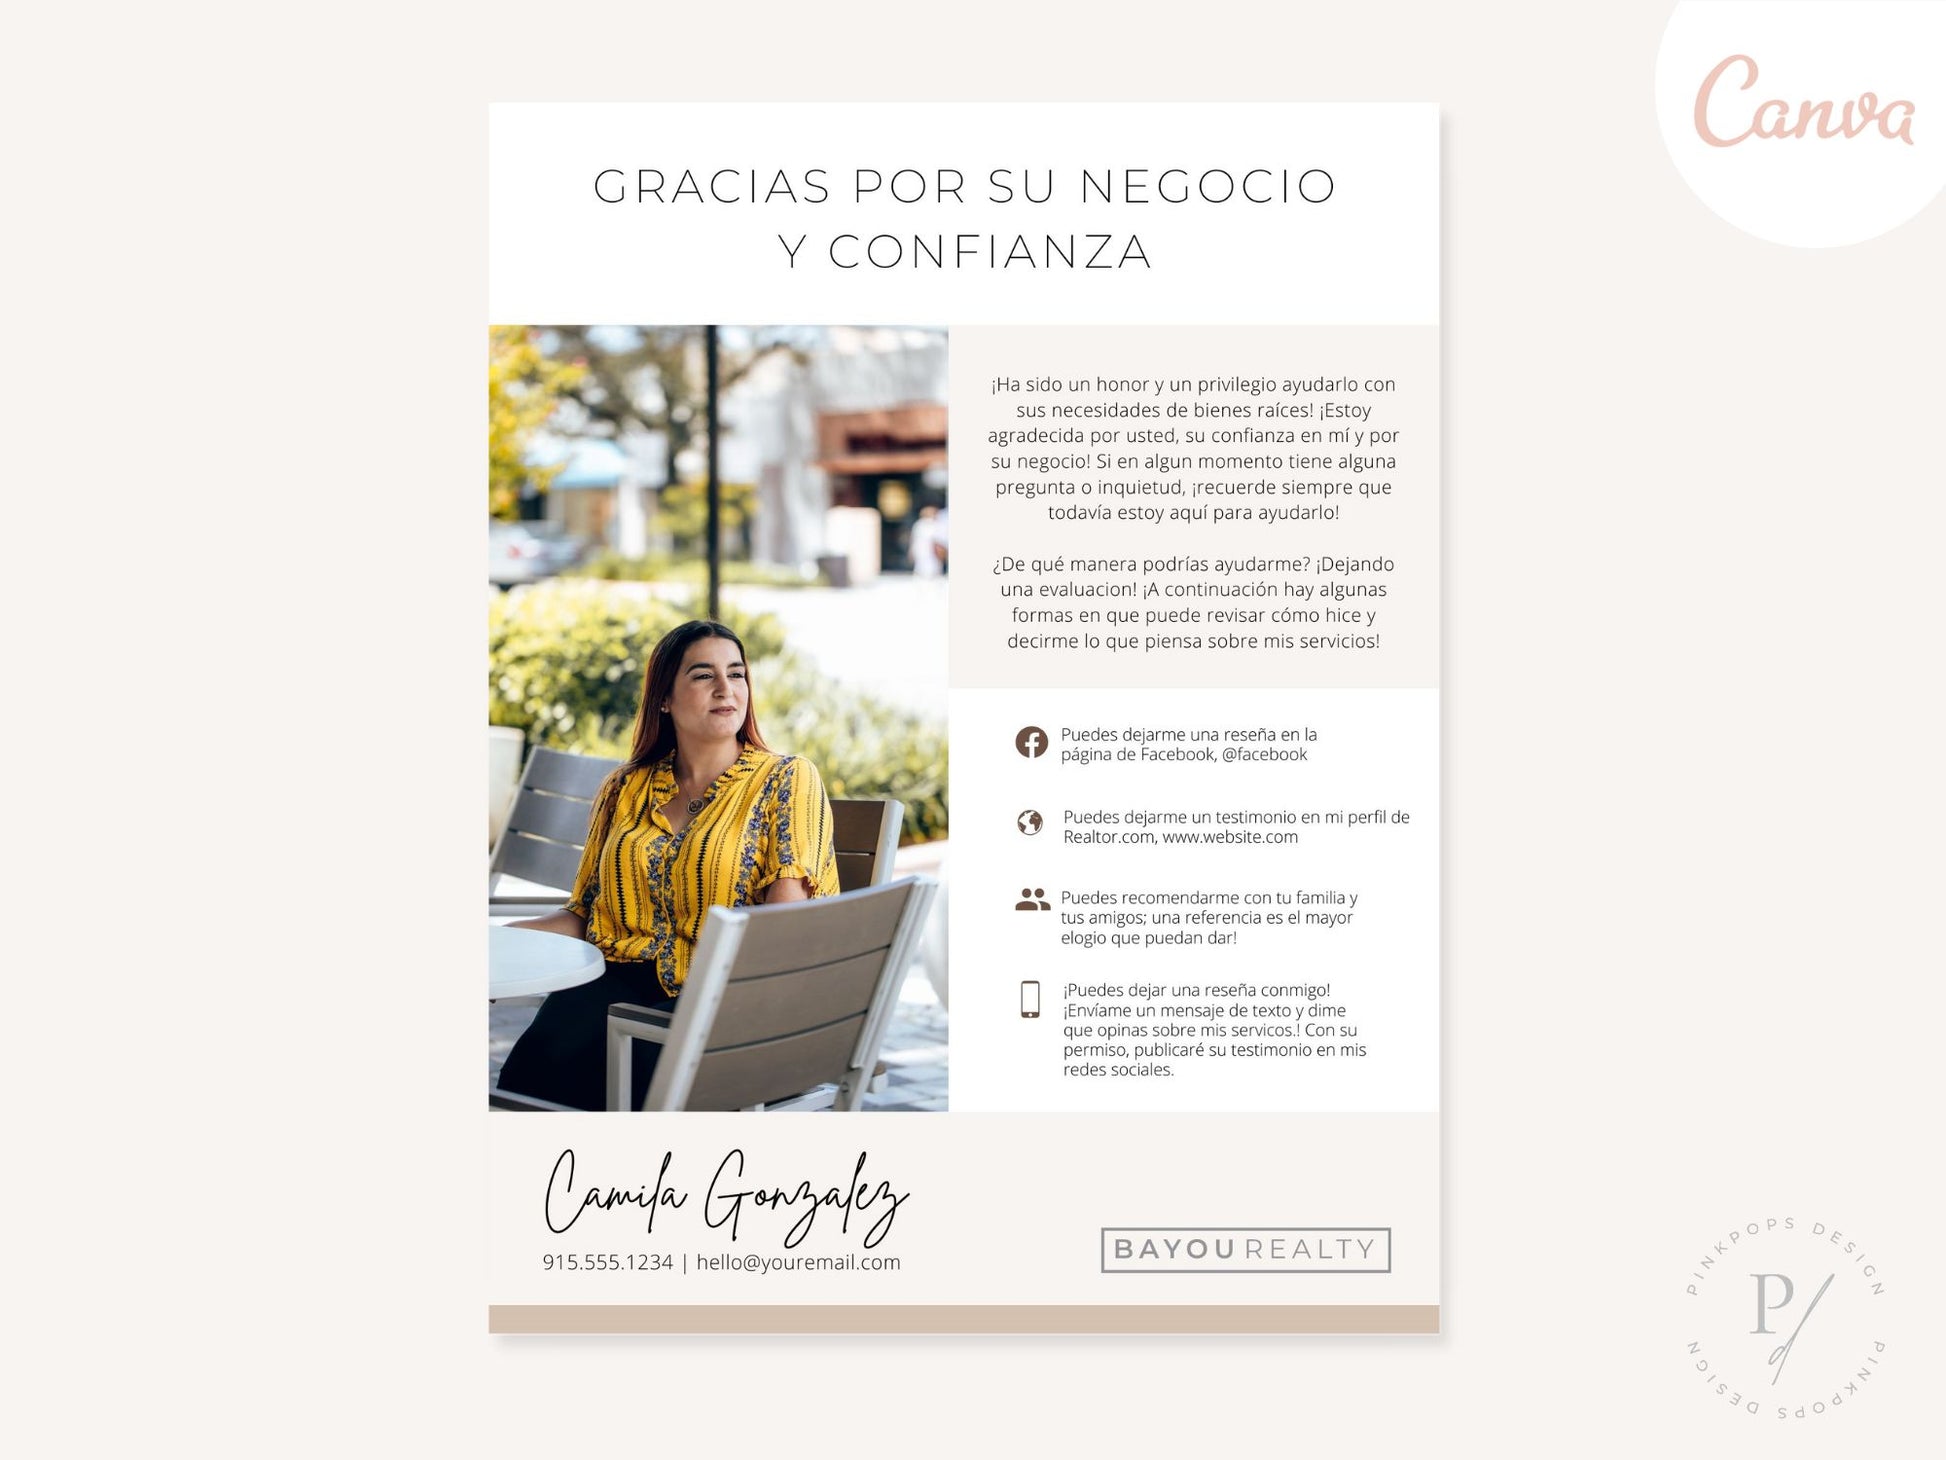 Spanish Review Request Flyer - Solicit client feedback in Spanish with this visually appealing flyer, encouraging Spanish-speaking clients to share their experiences for building trust and credibility.